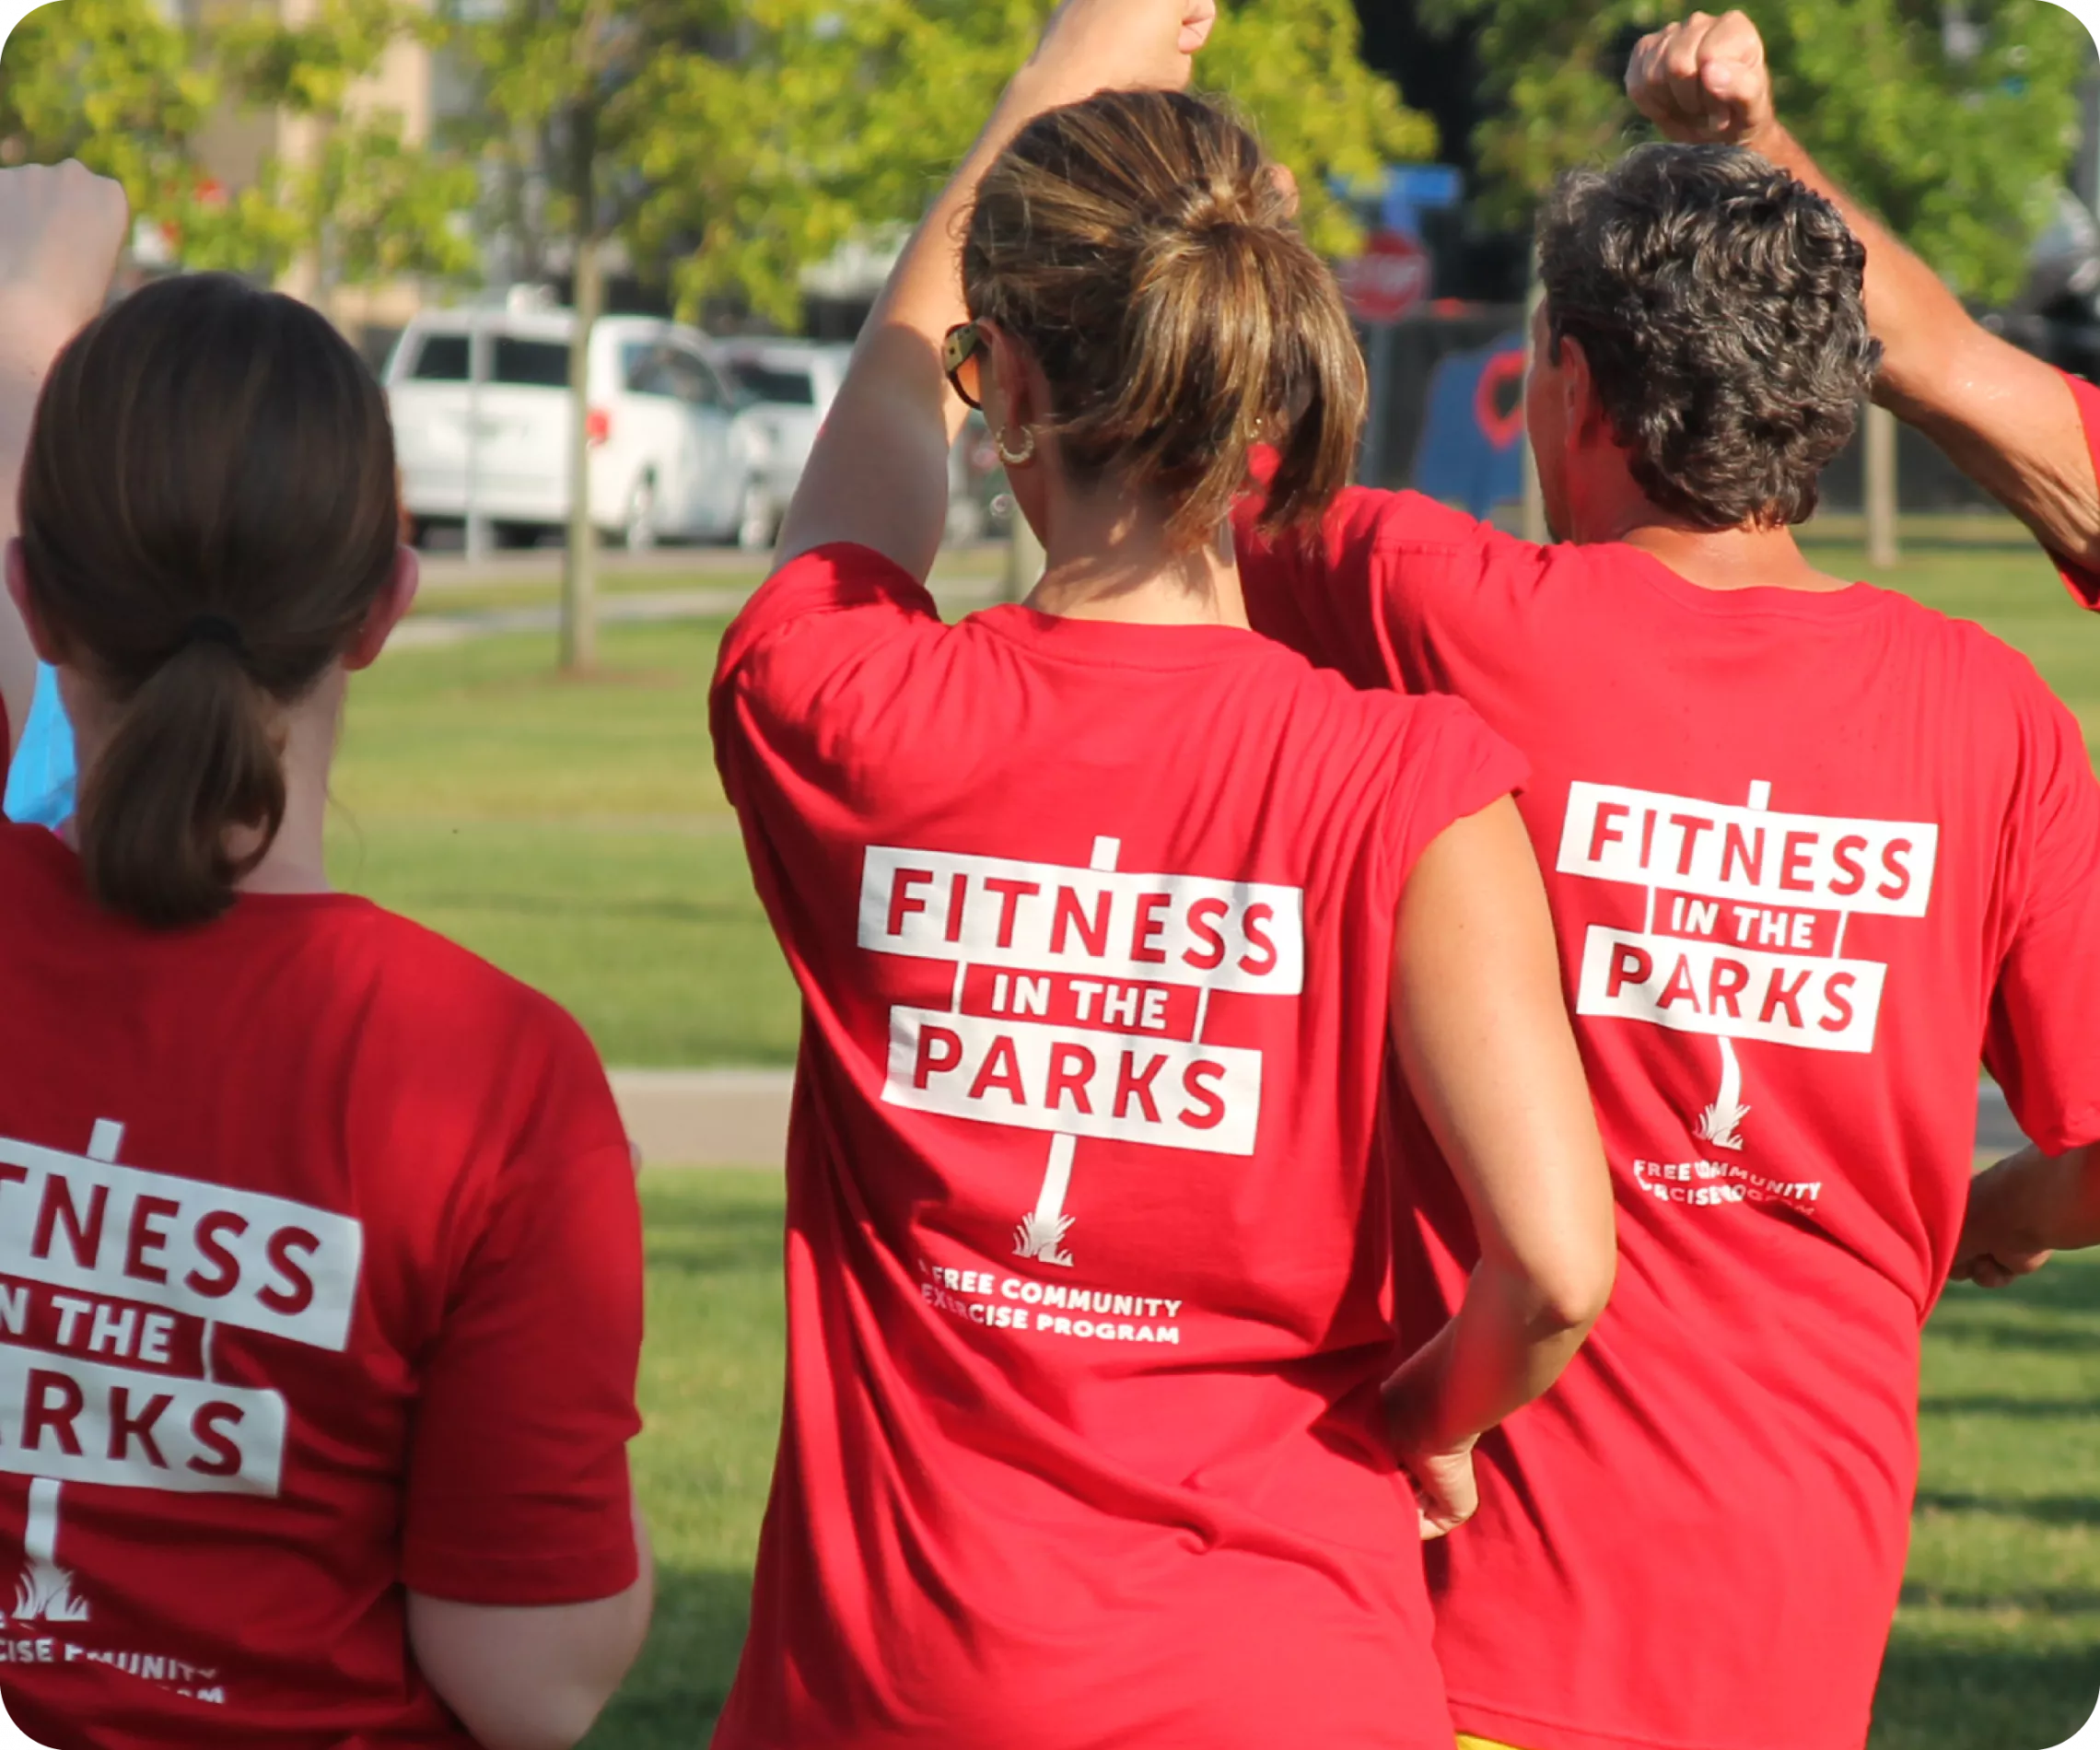 22Featured Content - Fitness in the Parks